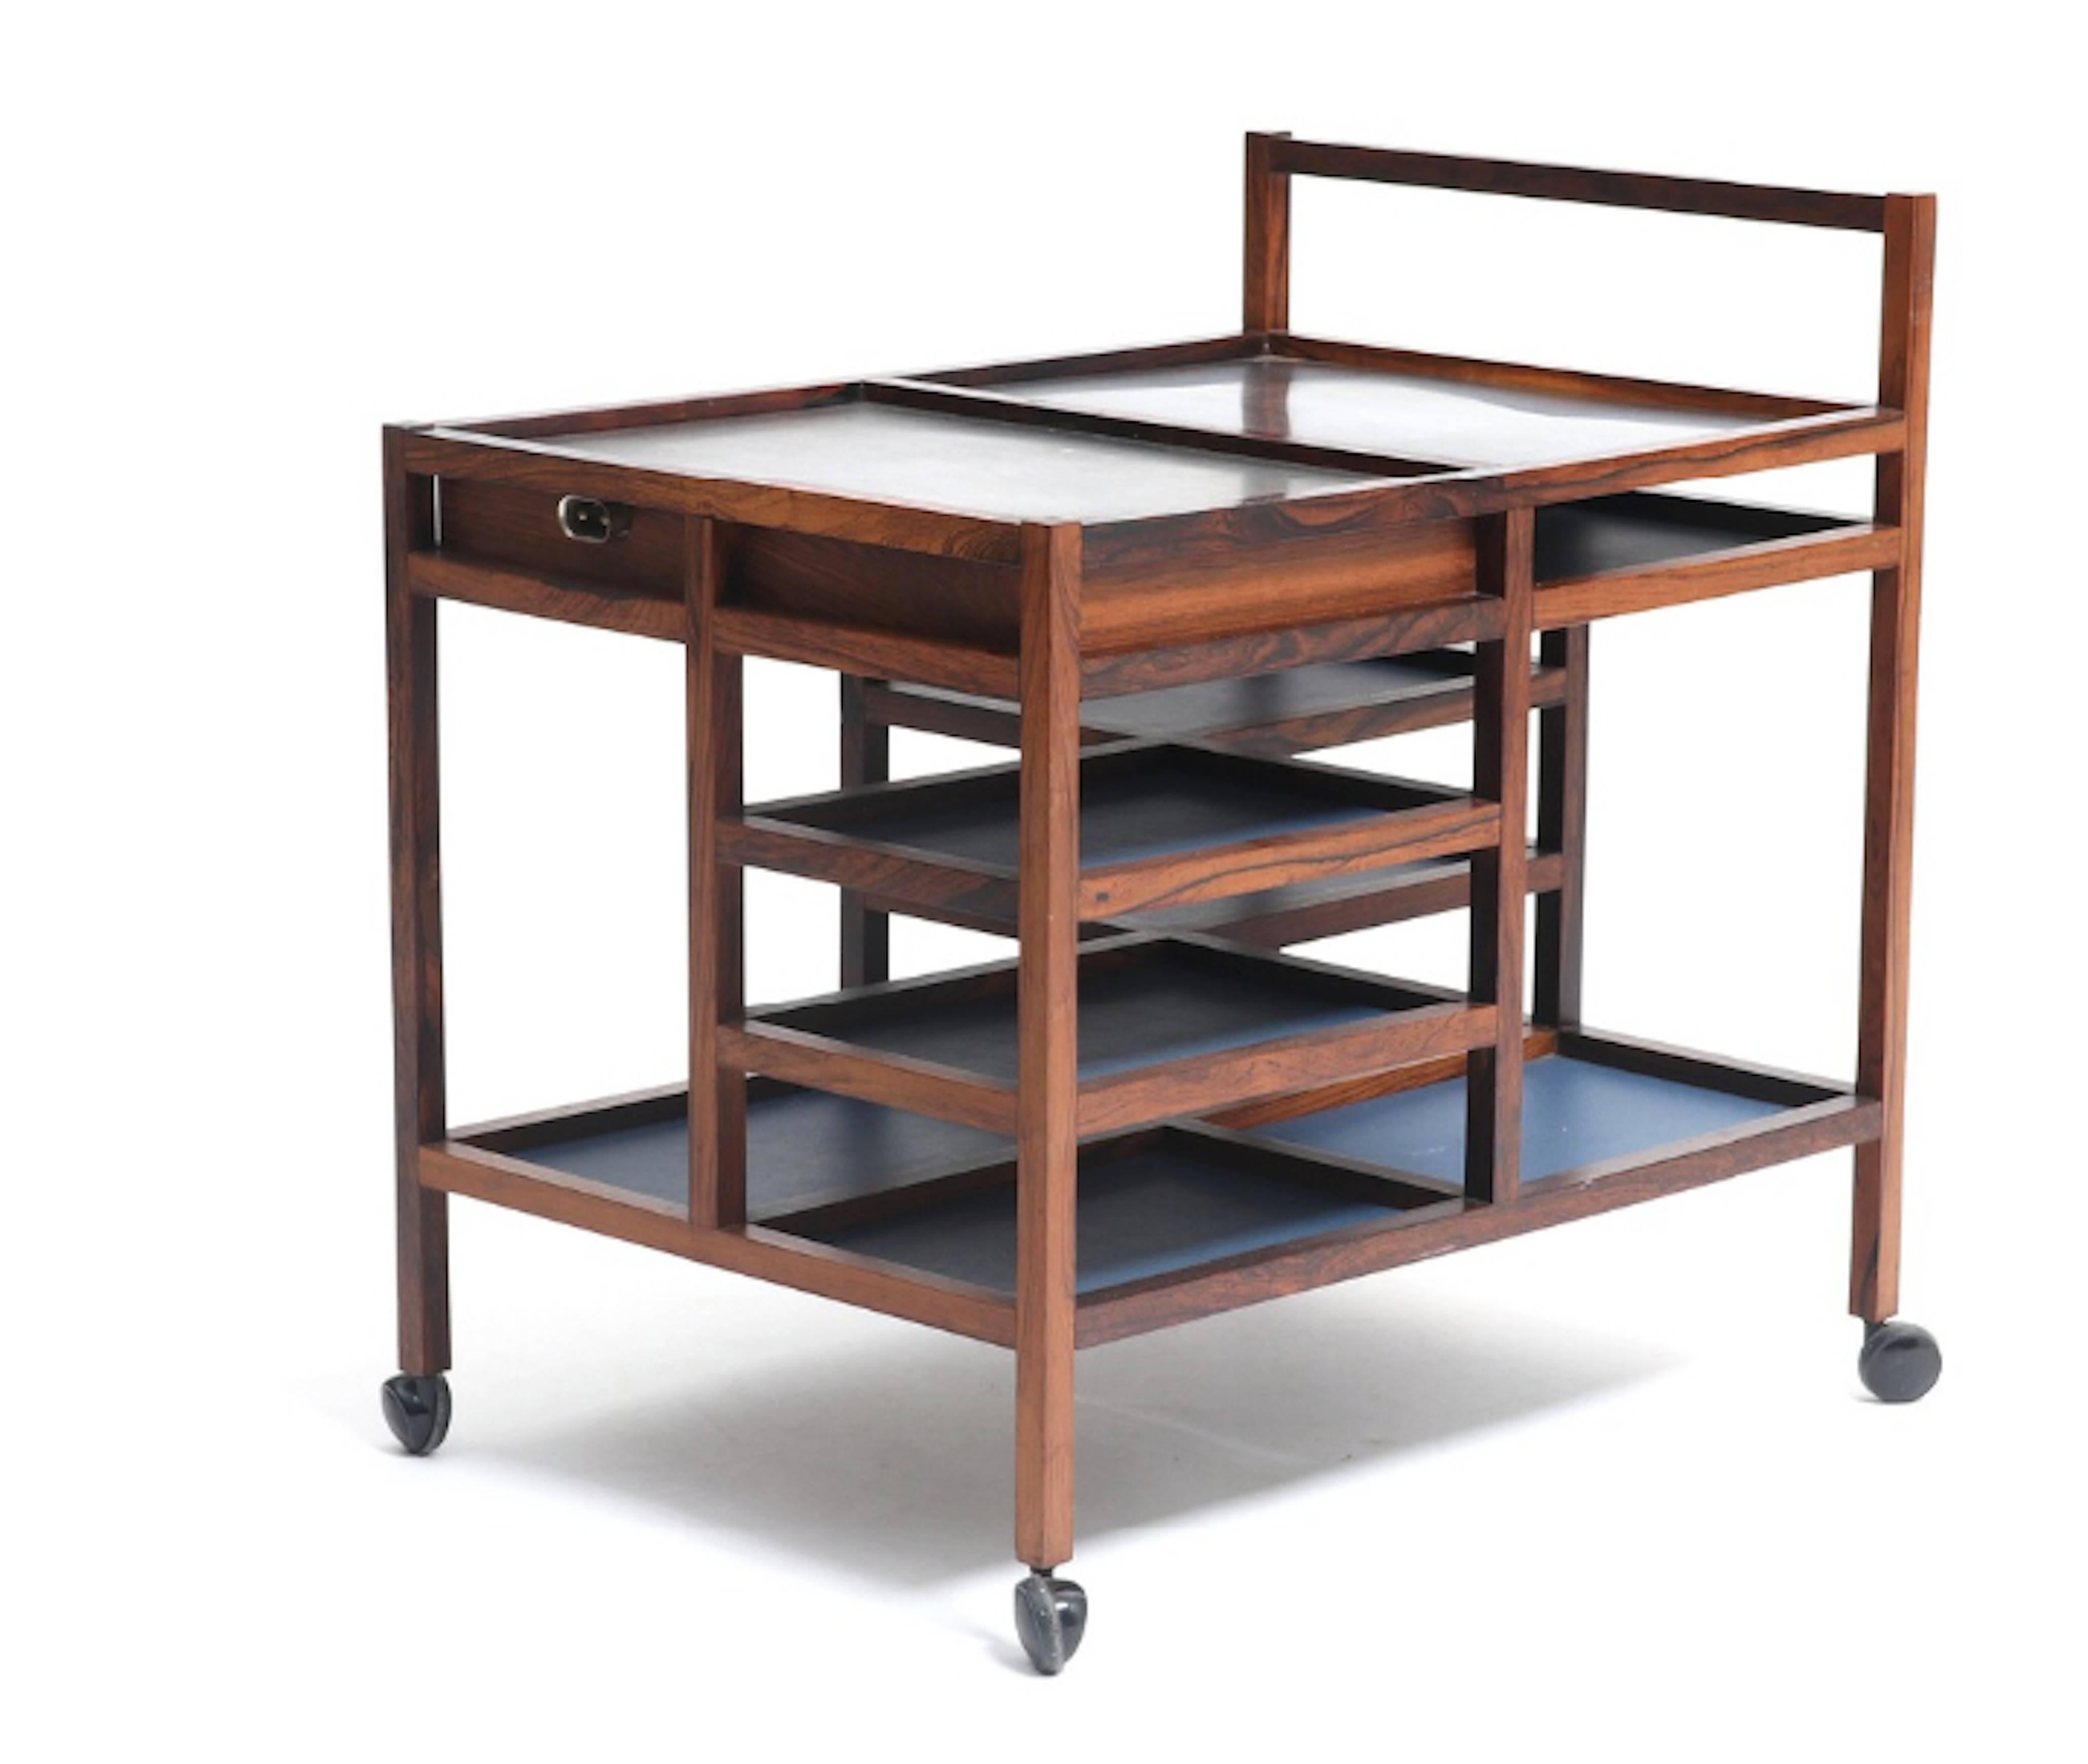 A Brazilian rosewood serving cart .Top in two sections with steel, one with electric heating. One drawer and shelves covered with blue vinyl. Mounted on casters. This piece edited late 1960s by Pedersen & and Son.
Bodil Kjaer designed this serving